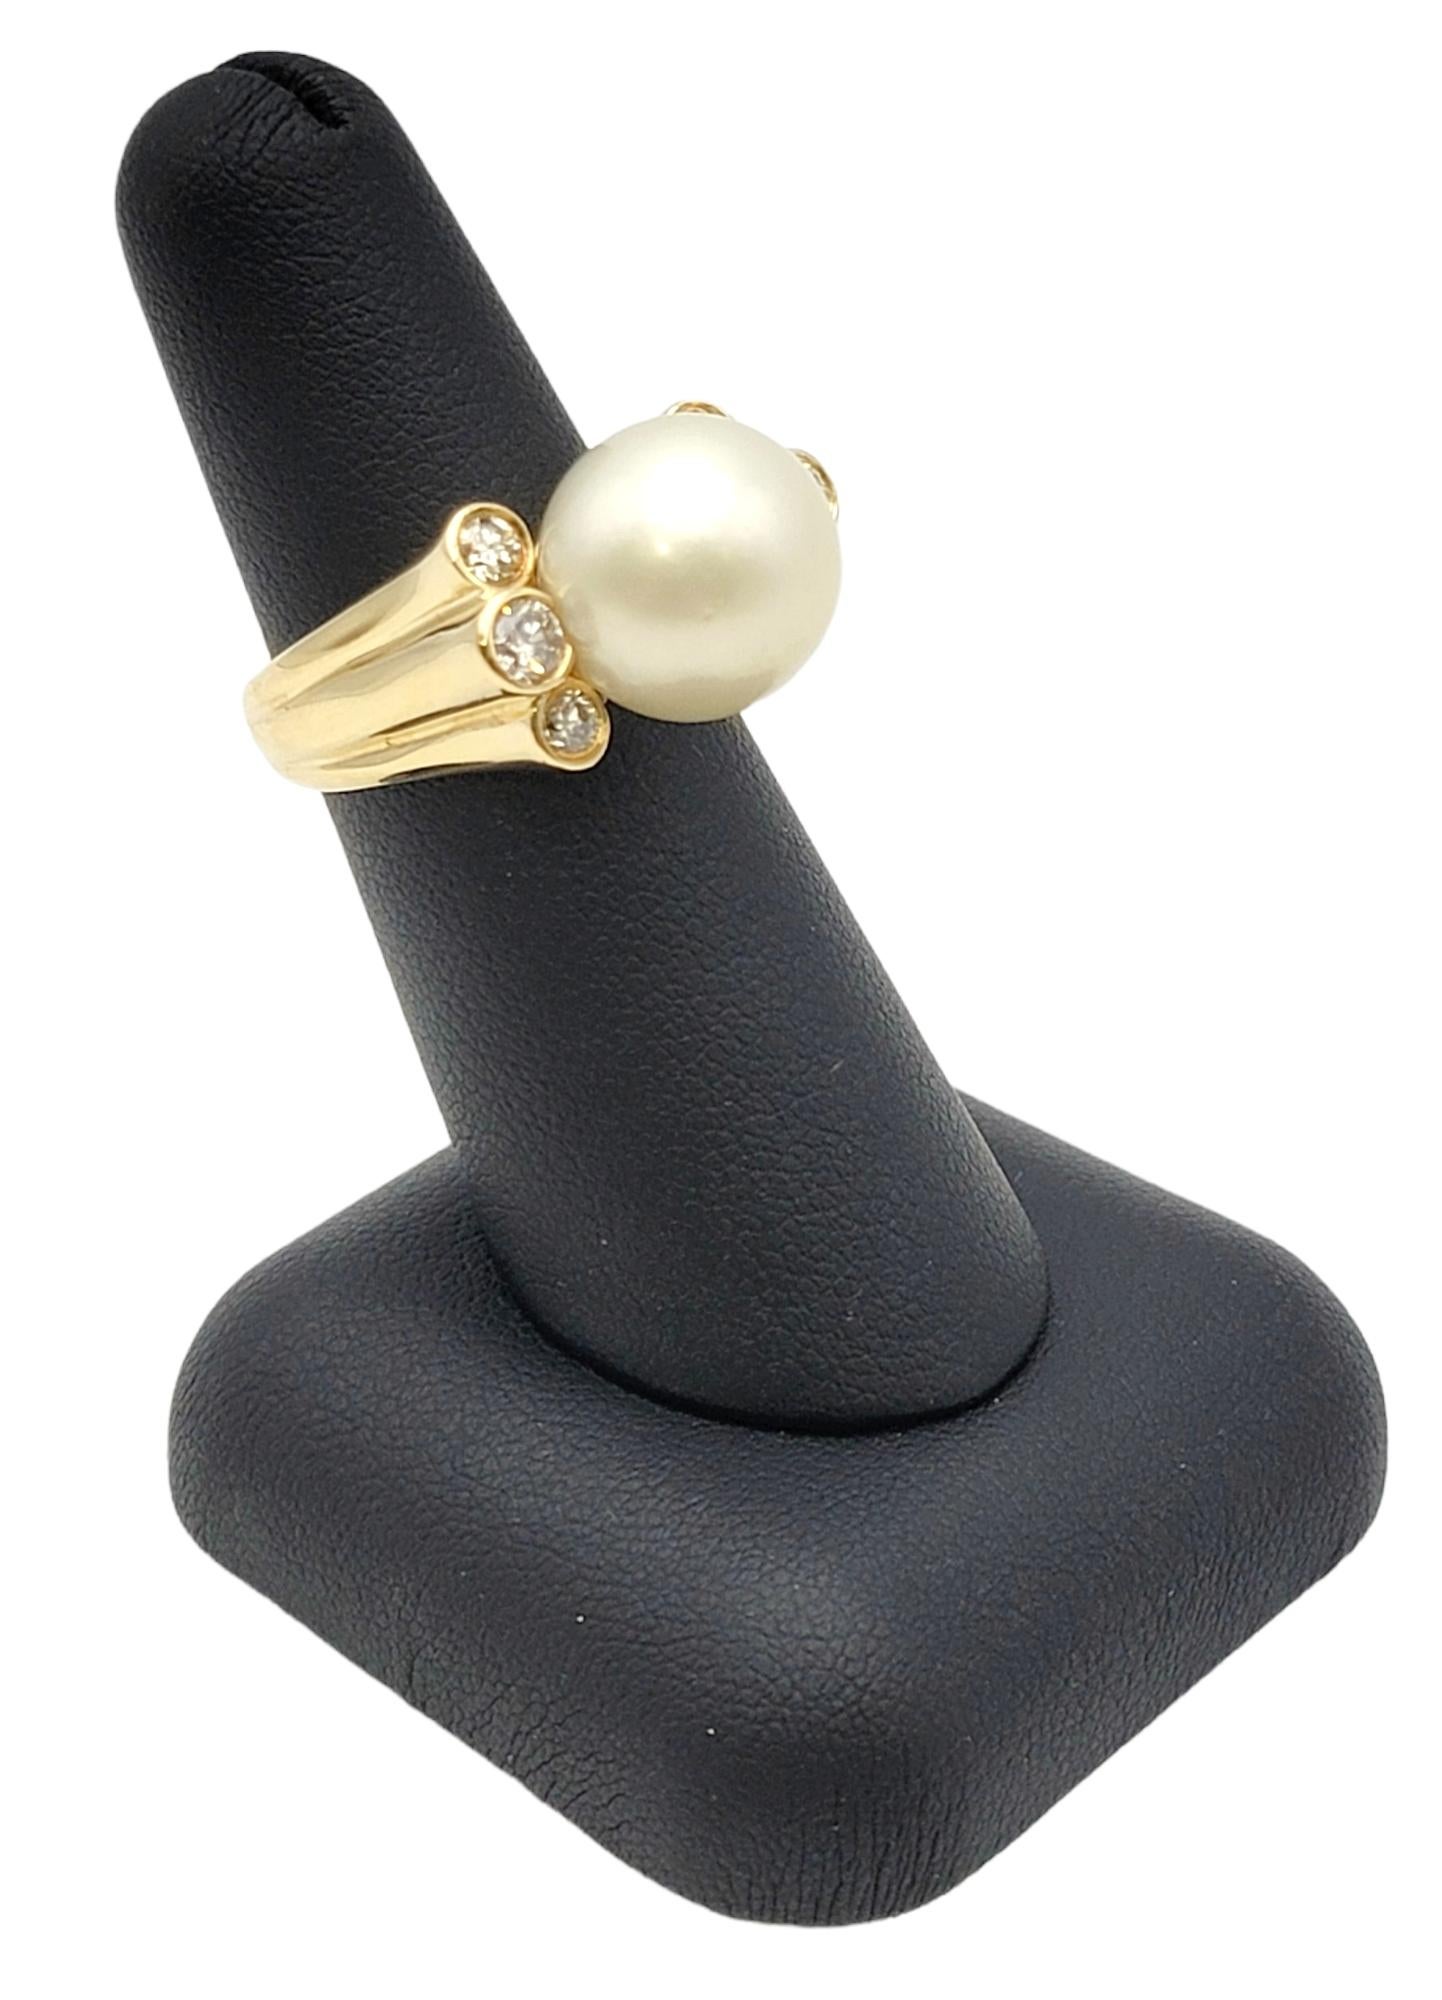 South Sea 12mm Cultured Pearl and Bezel Set Diamond Ring in 18 Yellow Gold  For Sale 4